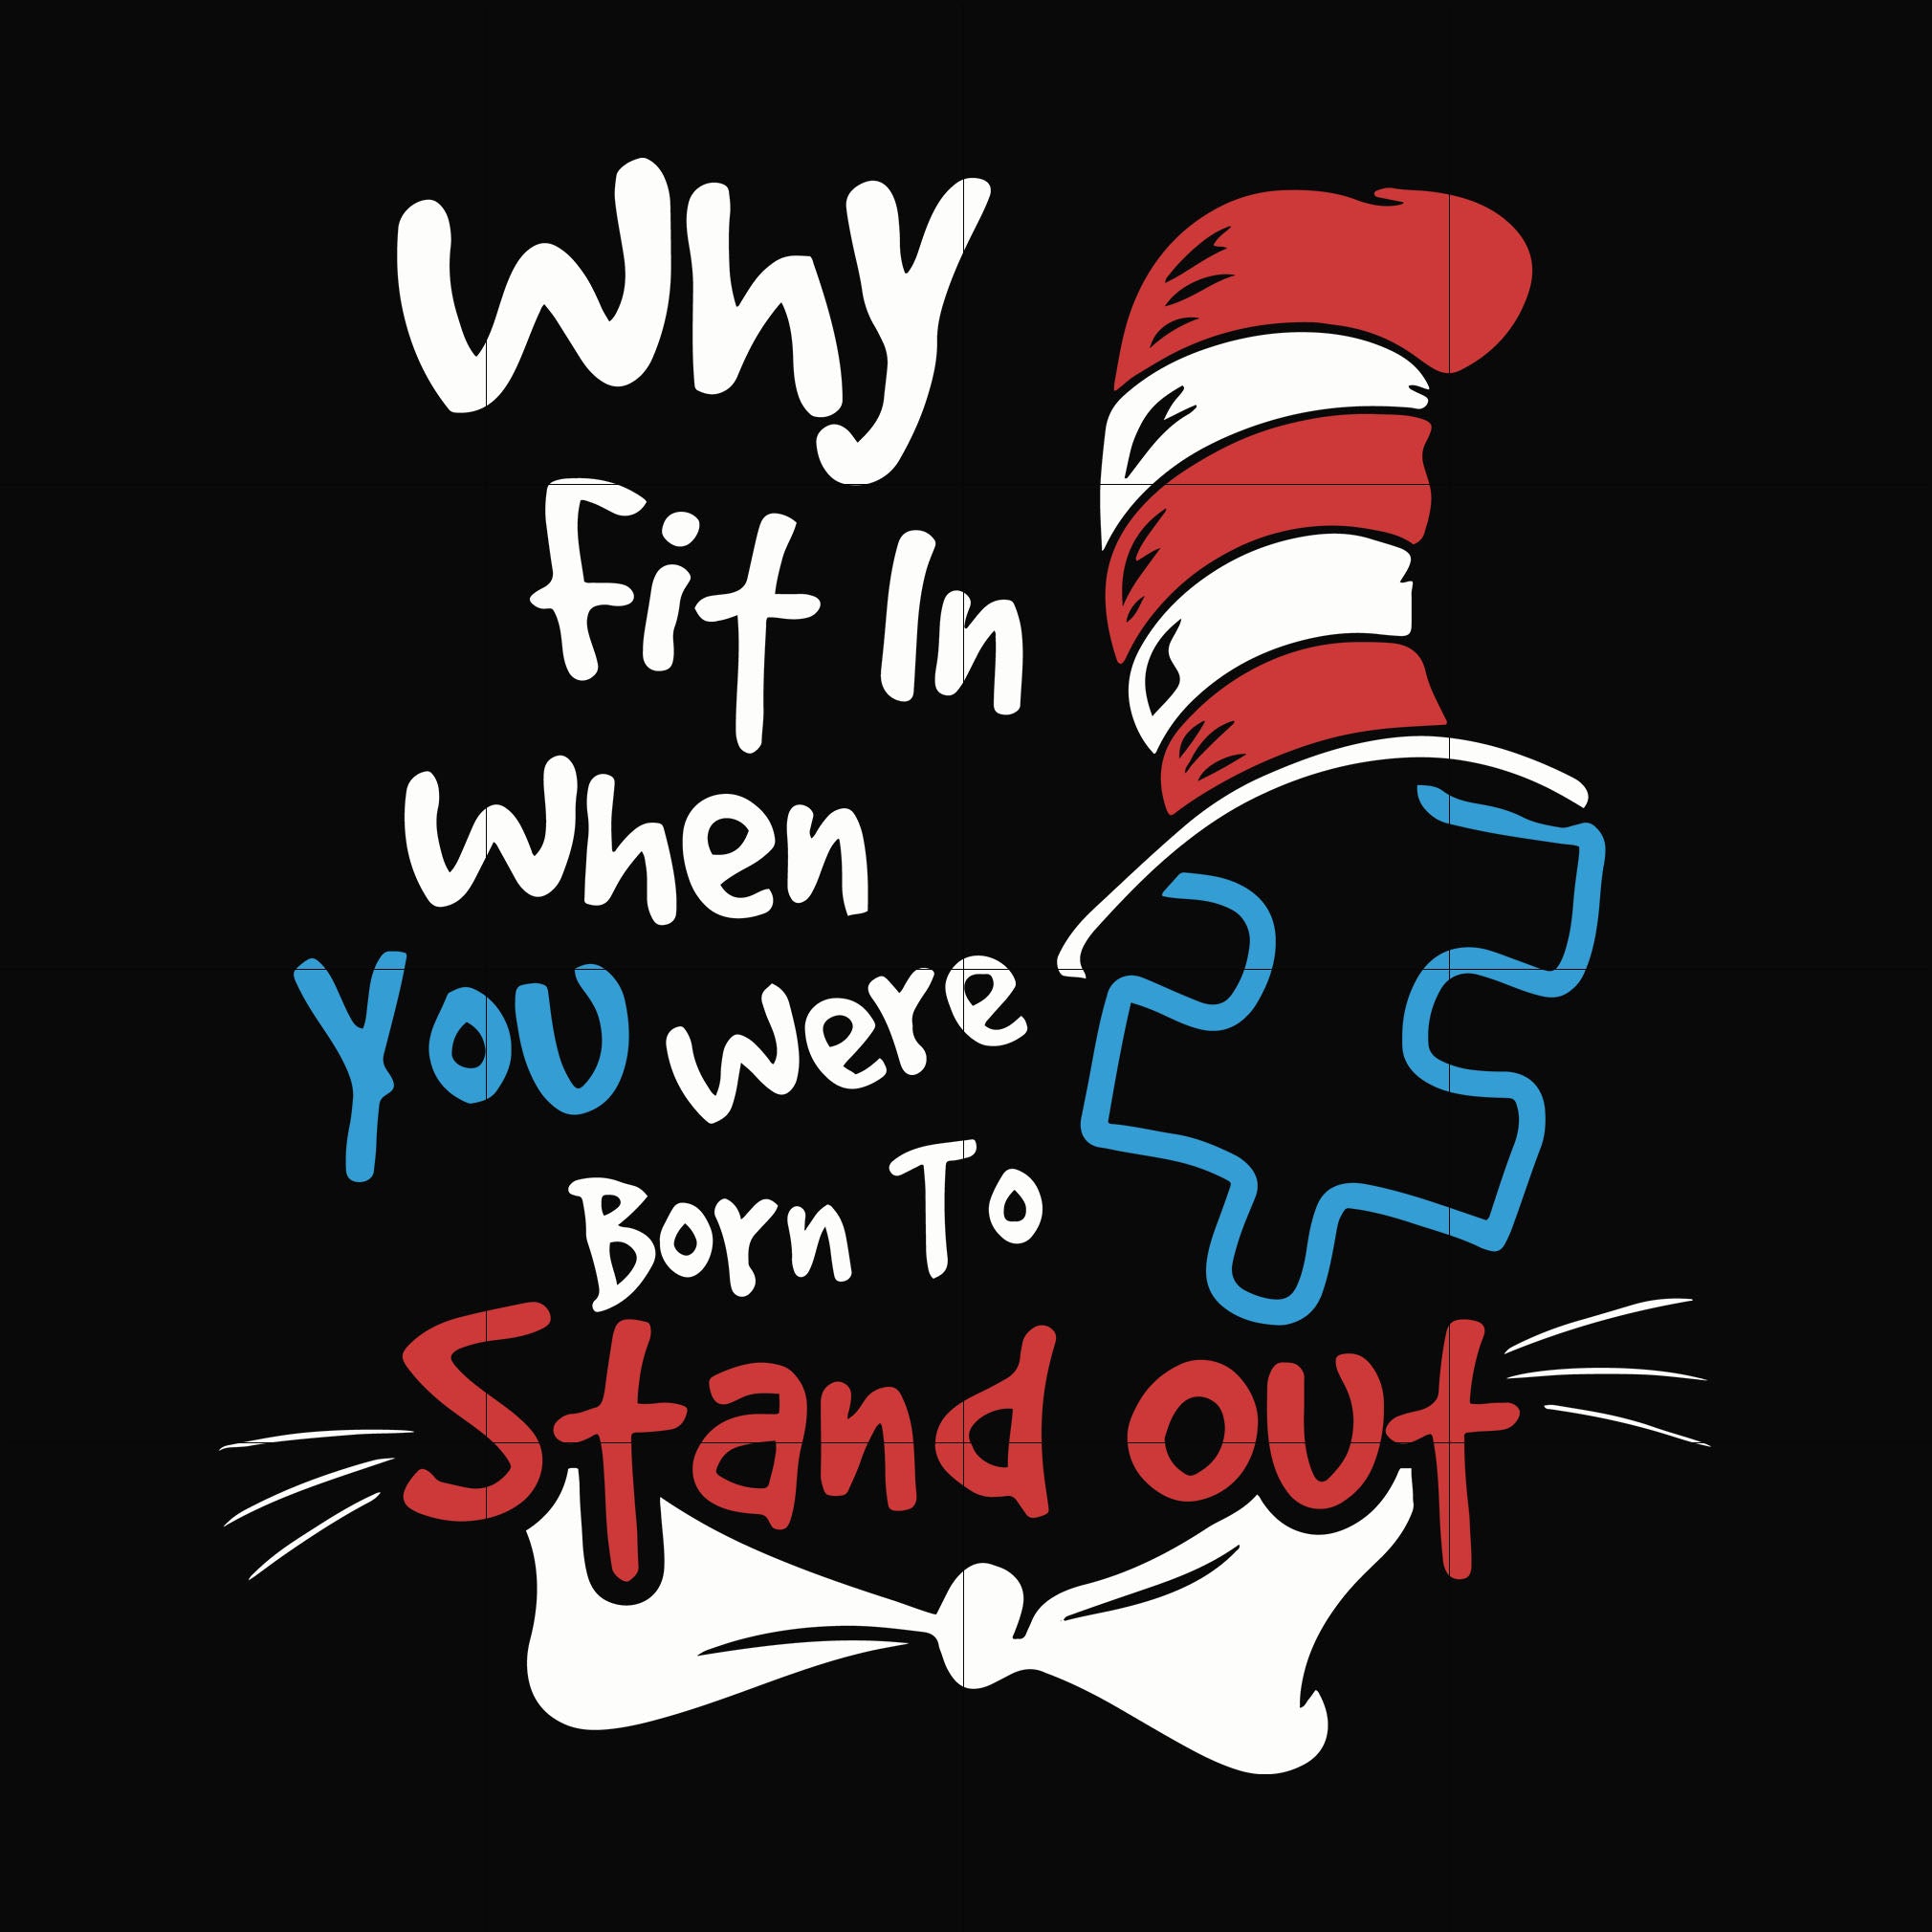 You were born to stand out